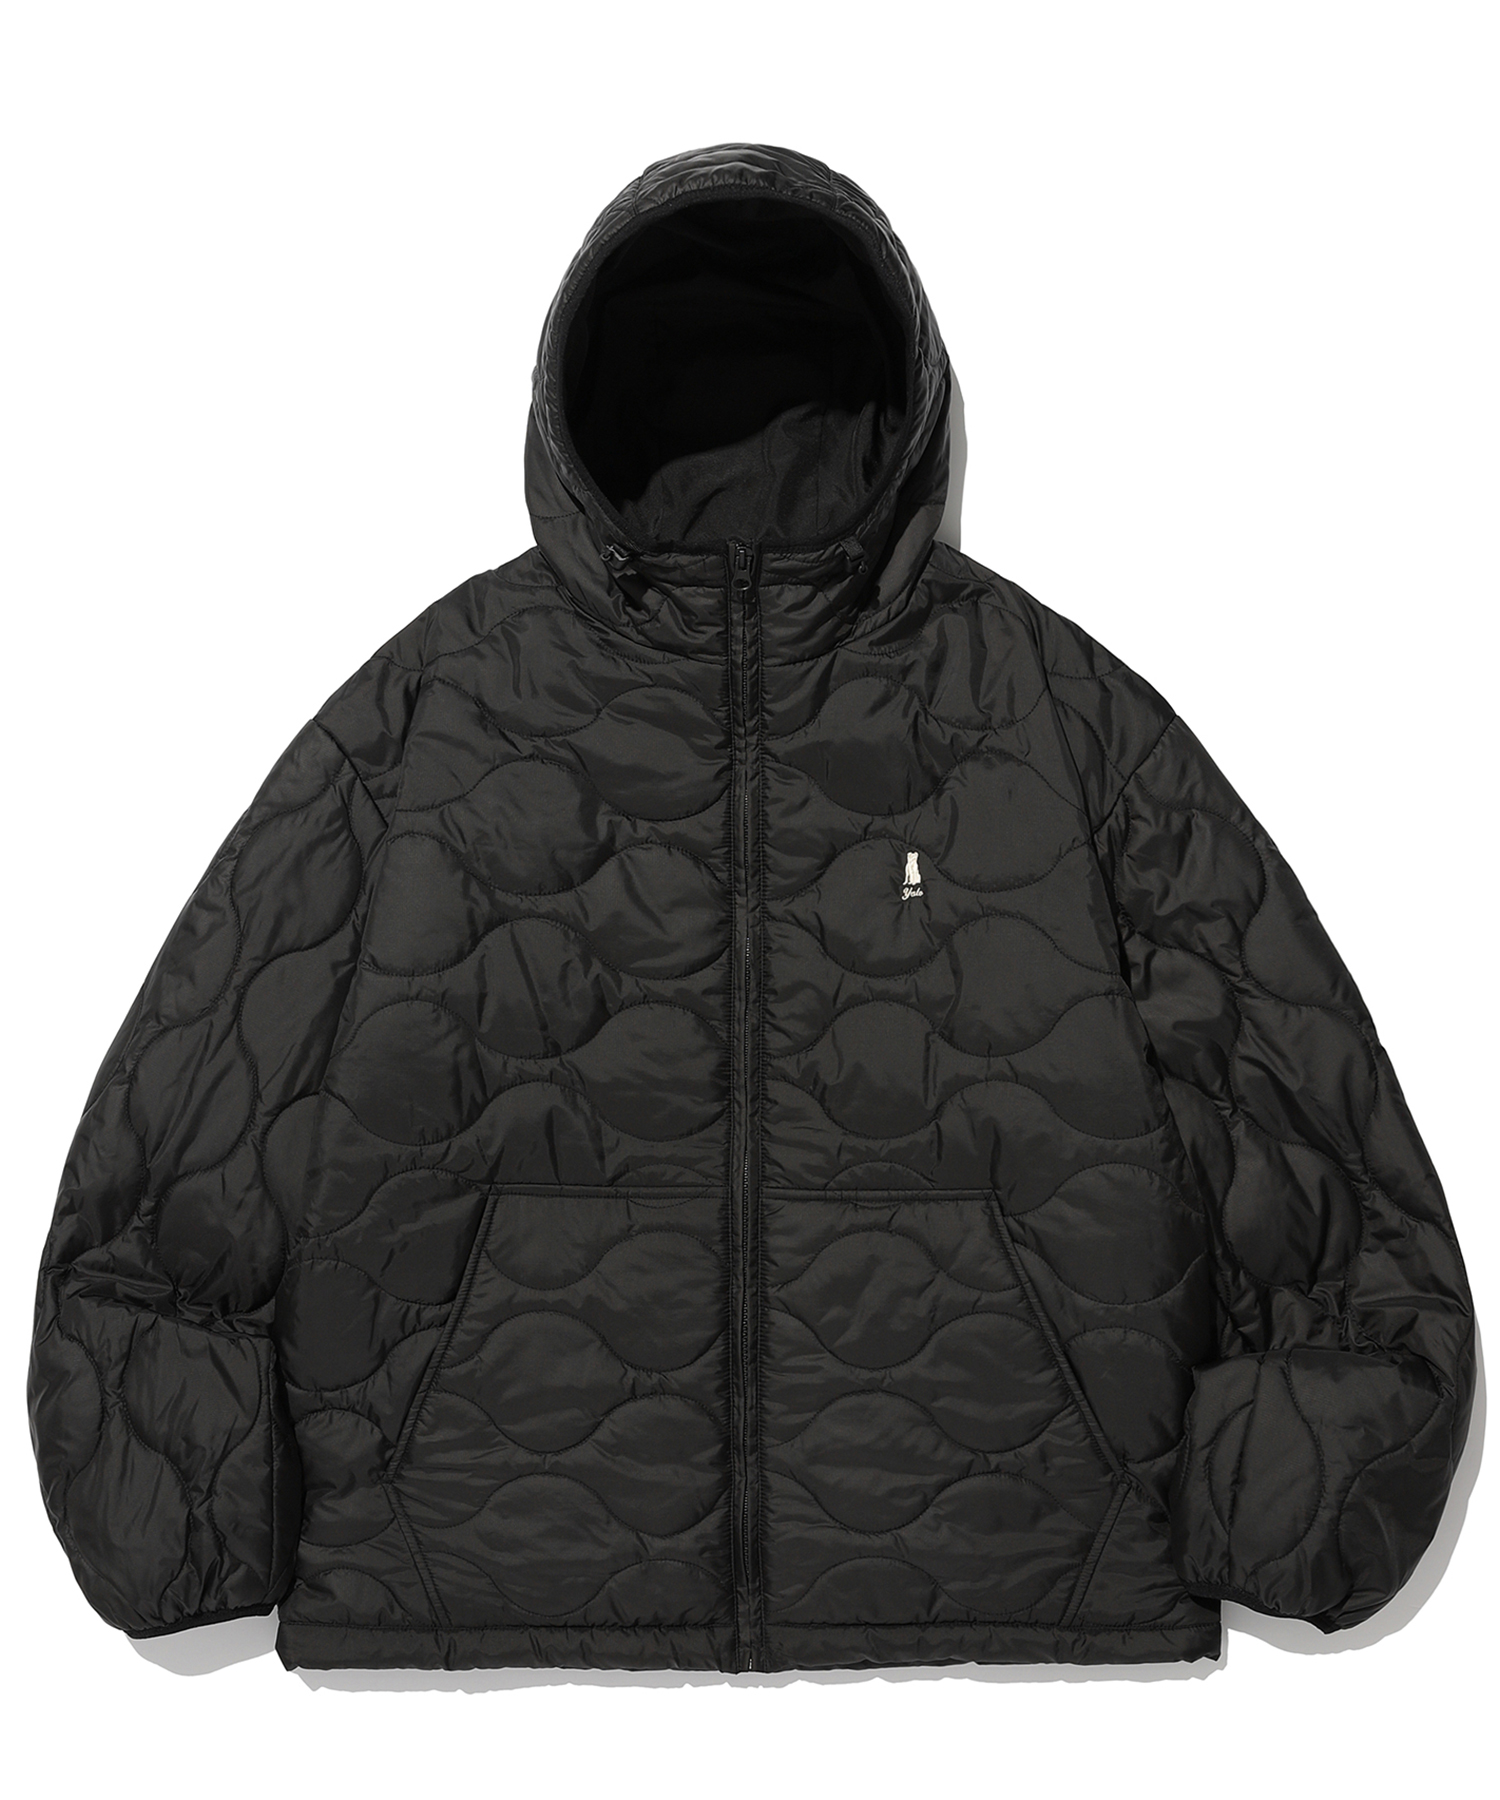 QUILTING HOODED ZIP UP BLACK